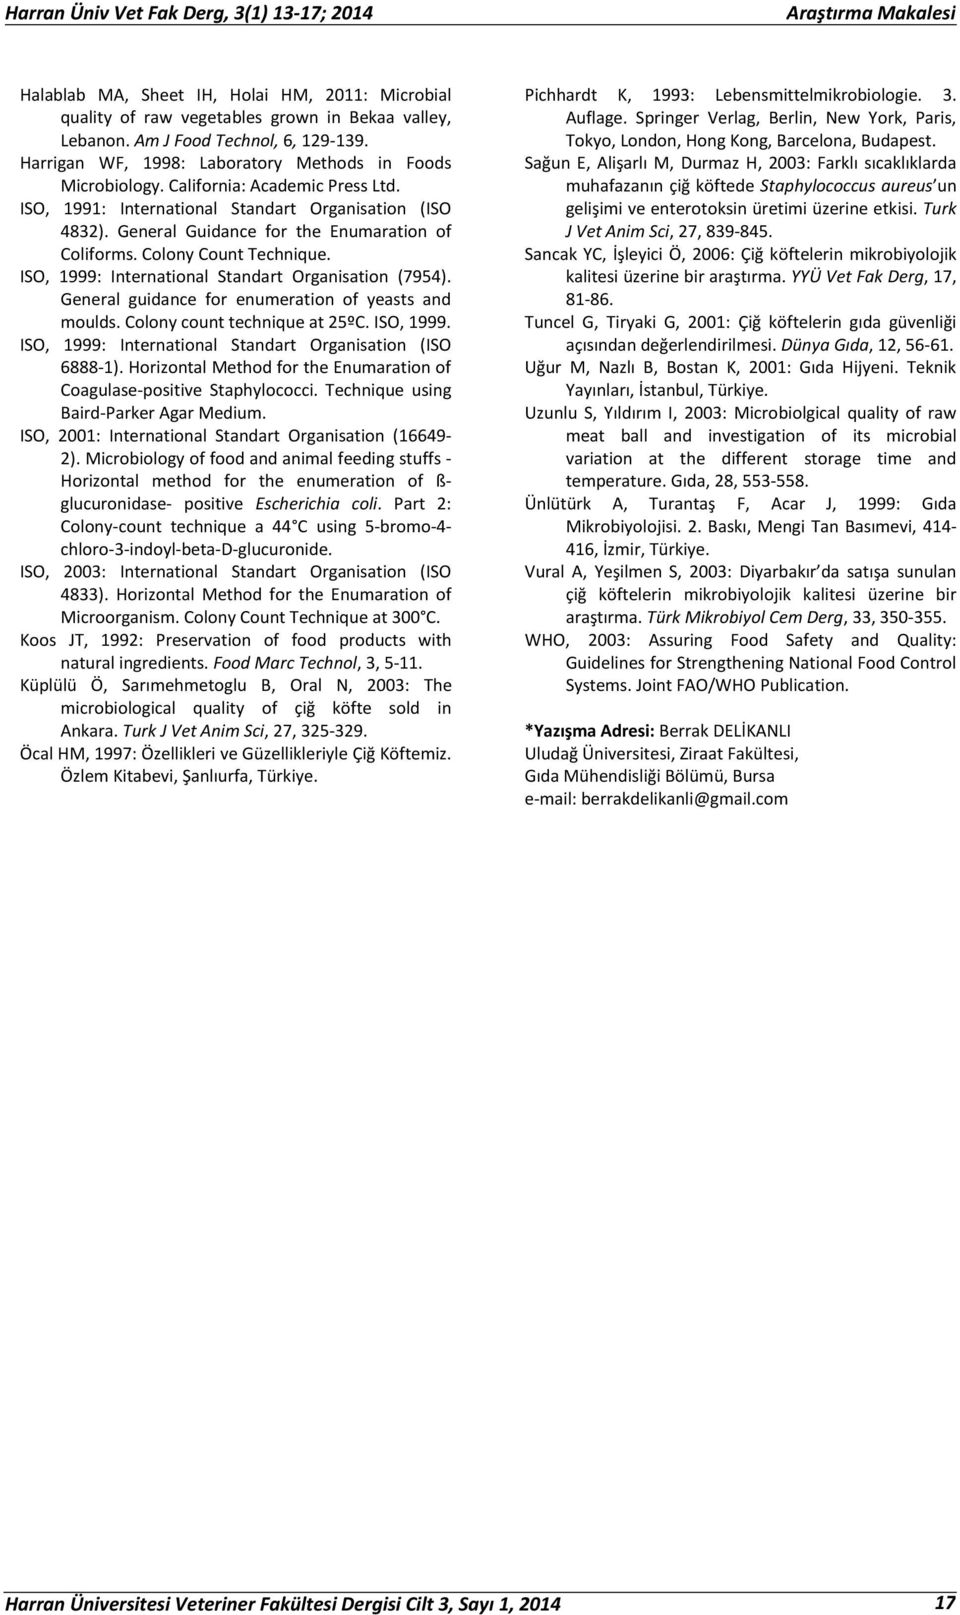 ISO, 1999: International Standart Organisation (7954). General guidance for enumeration of yeasts and moulds. Colony count technique at 25ºC. ISO, 1999.